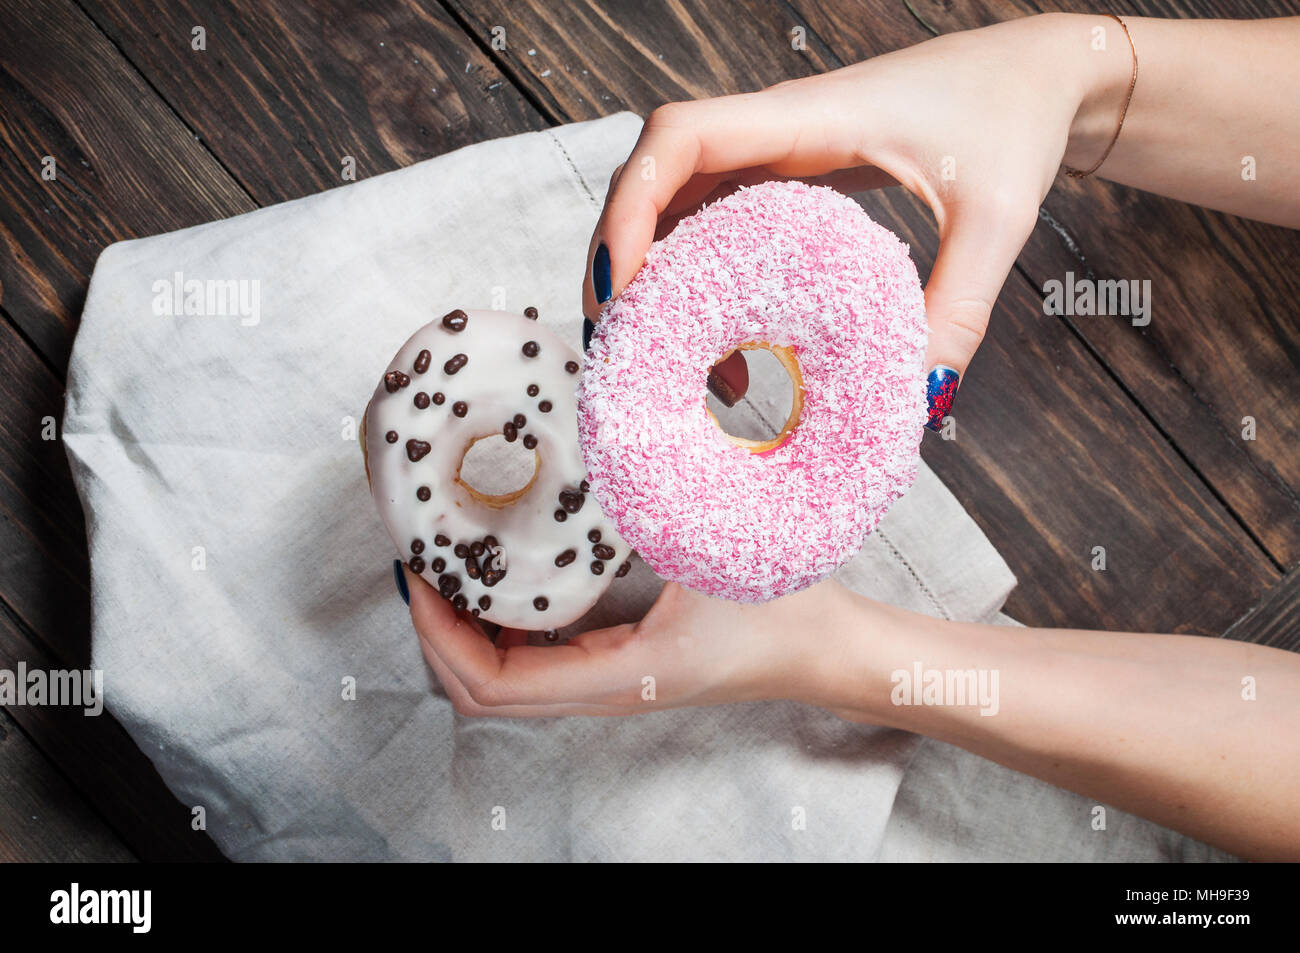 Female hand picking sweet sugary donut from rustic wooden kitchen table, tasty bakery doughnuts overhead shot, top view Stock Photo